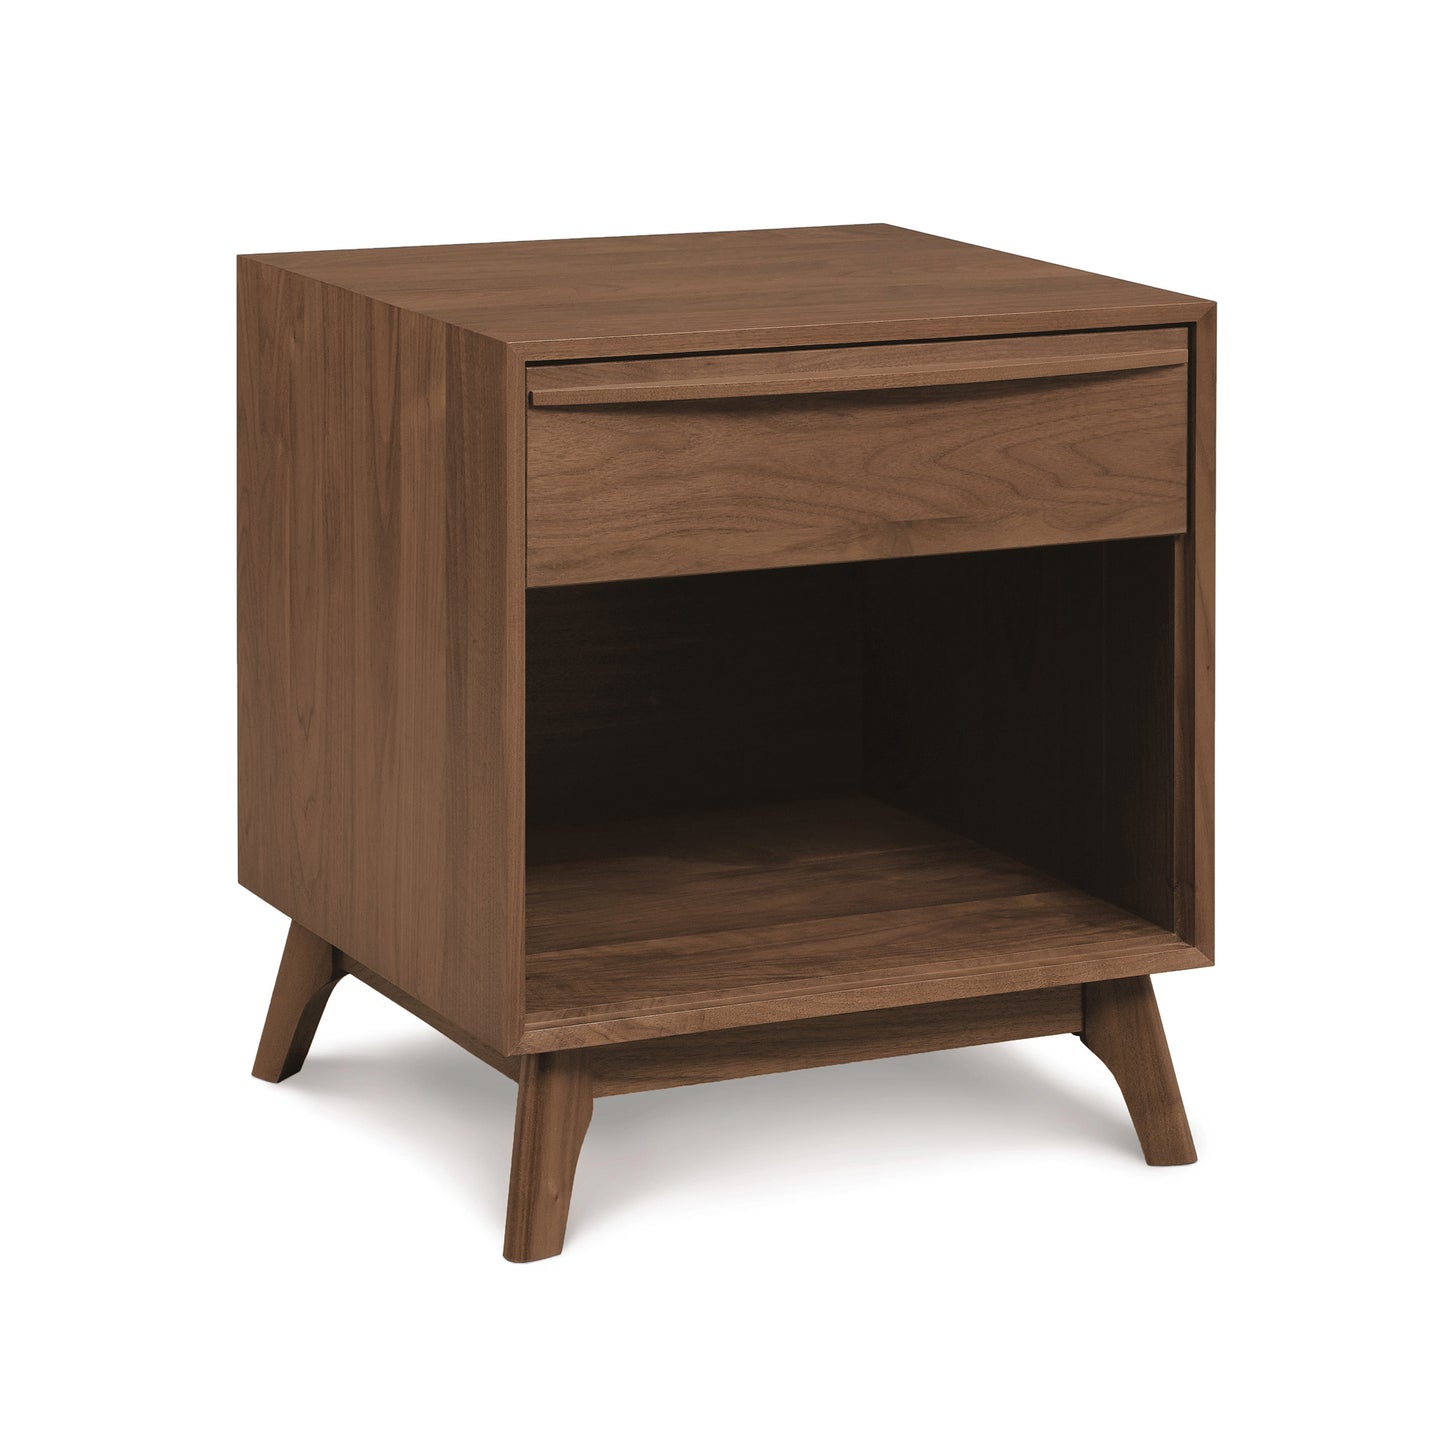 The Catalina 1-Drawer Enclosed Shelf Nightstand by Copeland Furniture is a modern bedroom essential with a solid wood base and two spacious drawers.